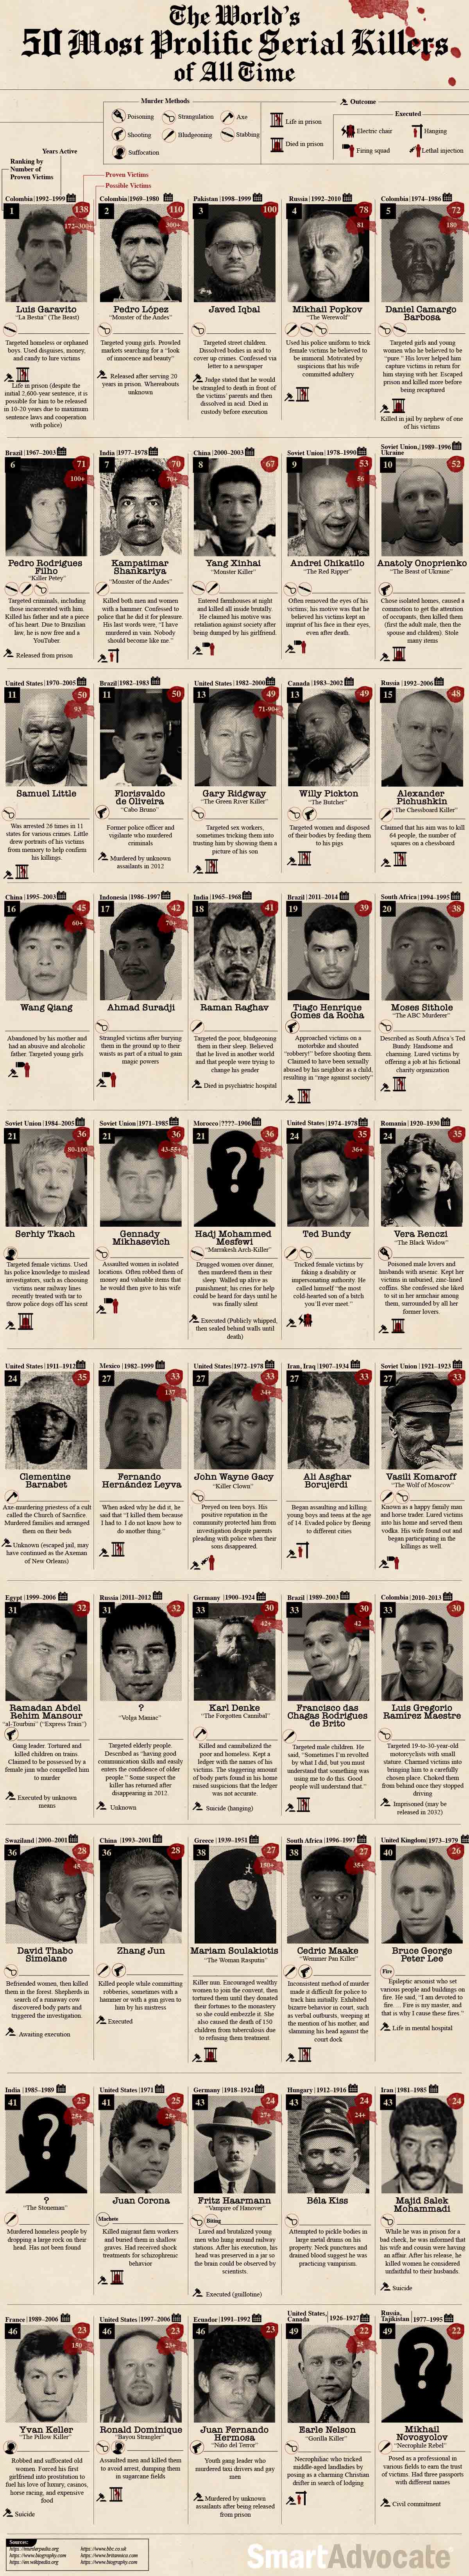 The World's Most Prolific Serial Killers of All Time